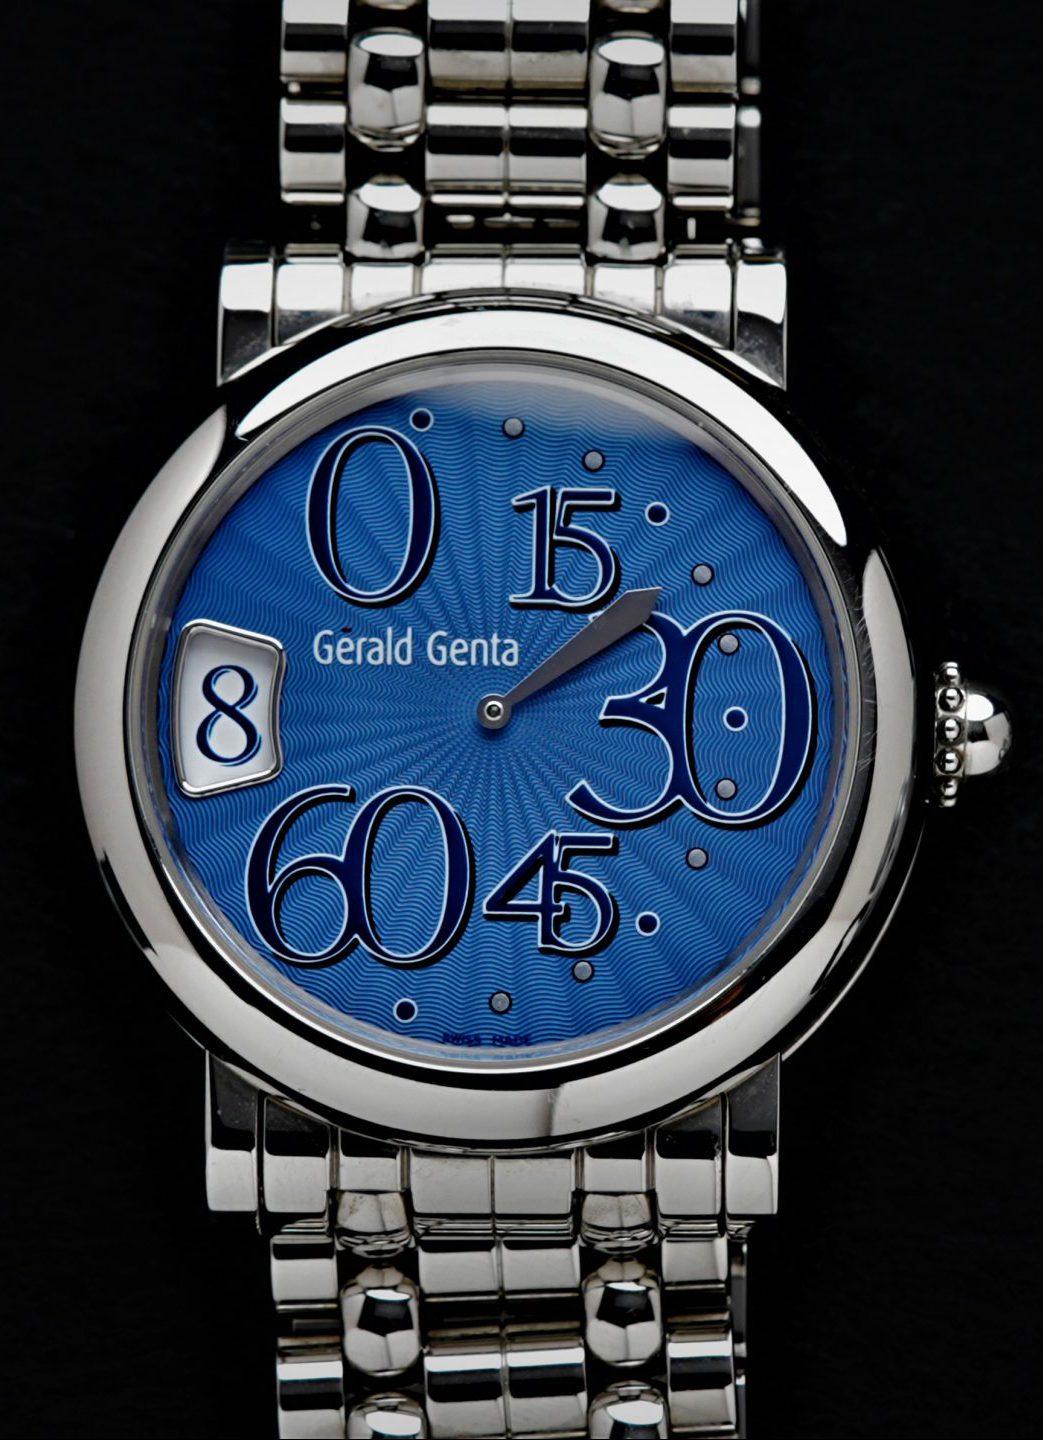 Gérald Genta Retro Classic Extremely Rare Blue Guilloche Dial Jump Hour watch